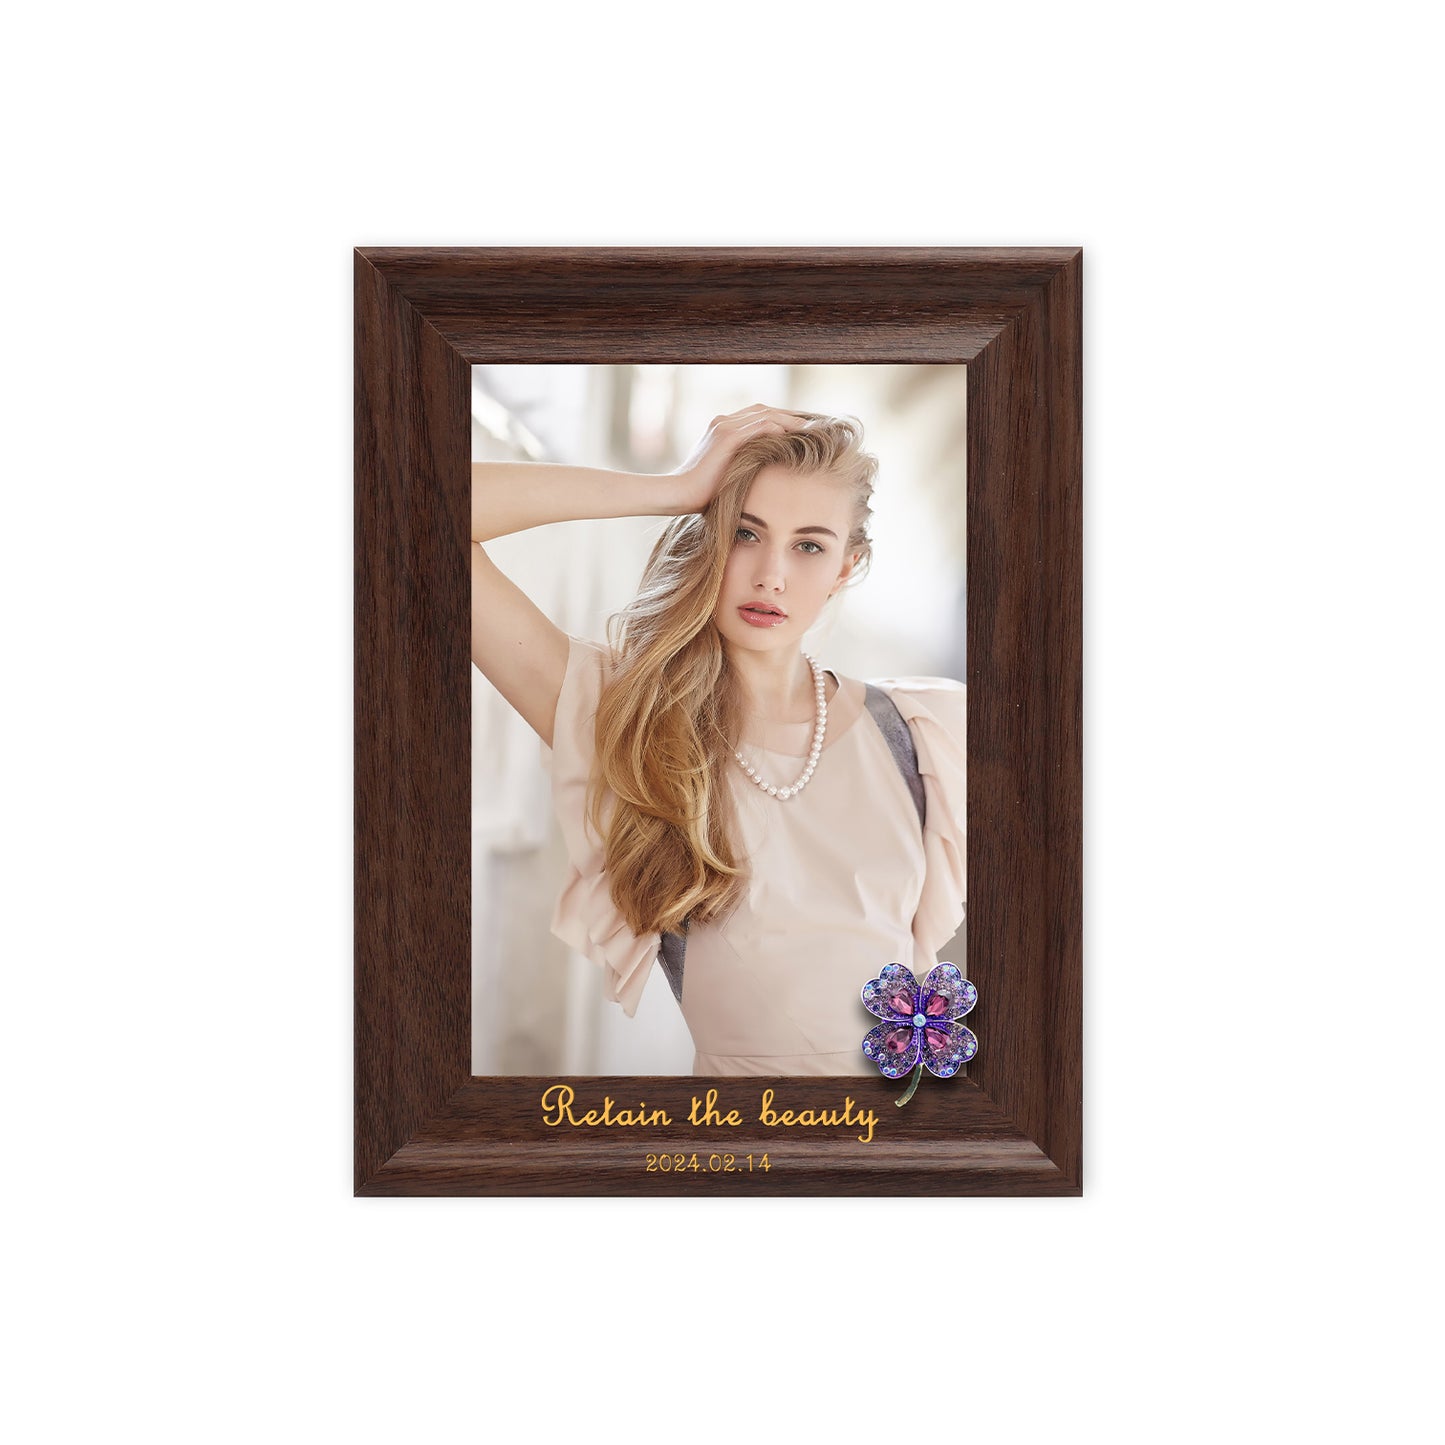 Decorating Photo Frames Ideas Dotride Custom Picture Frame, Wood Photo Frame with Custom Wooden Carving, Can be engraved with any text you want, suitable for Suitable for Various Themes, Clover Brown